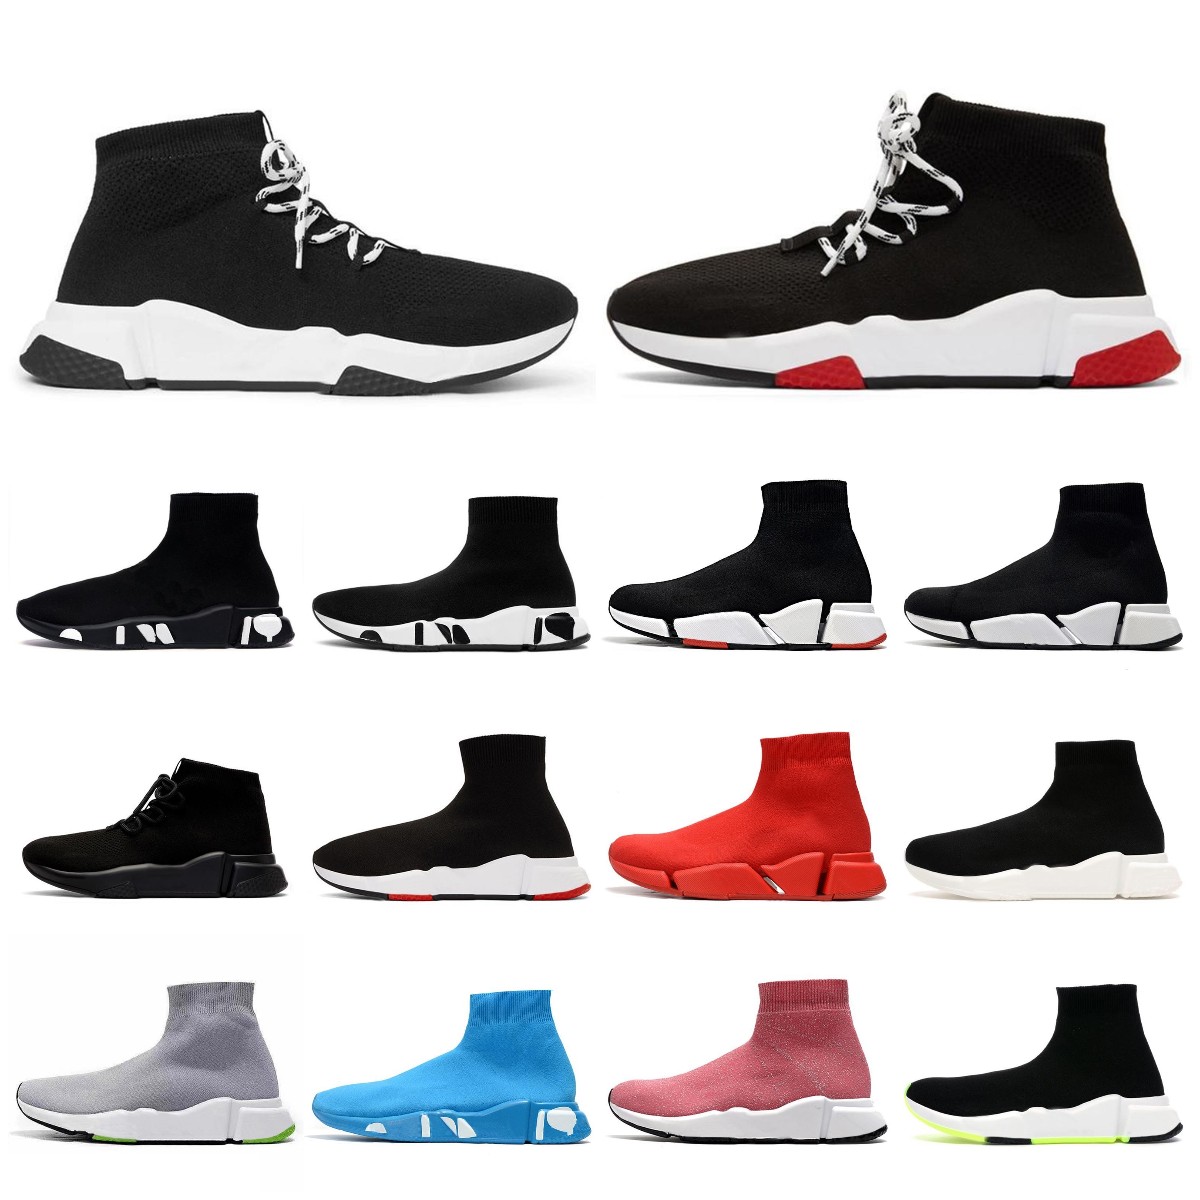 

Designer casual shoes sock sports trainers 2.0 lace-up trainer luxury paris women men nude glitter graffiti runners sneakers fashion socks boots Paris Knit outdoor, Box